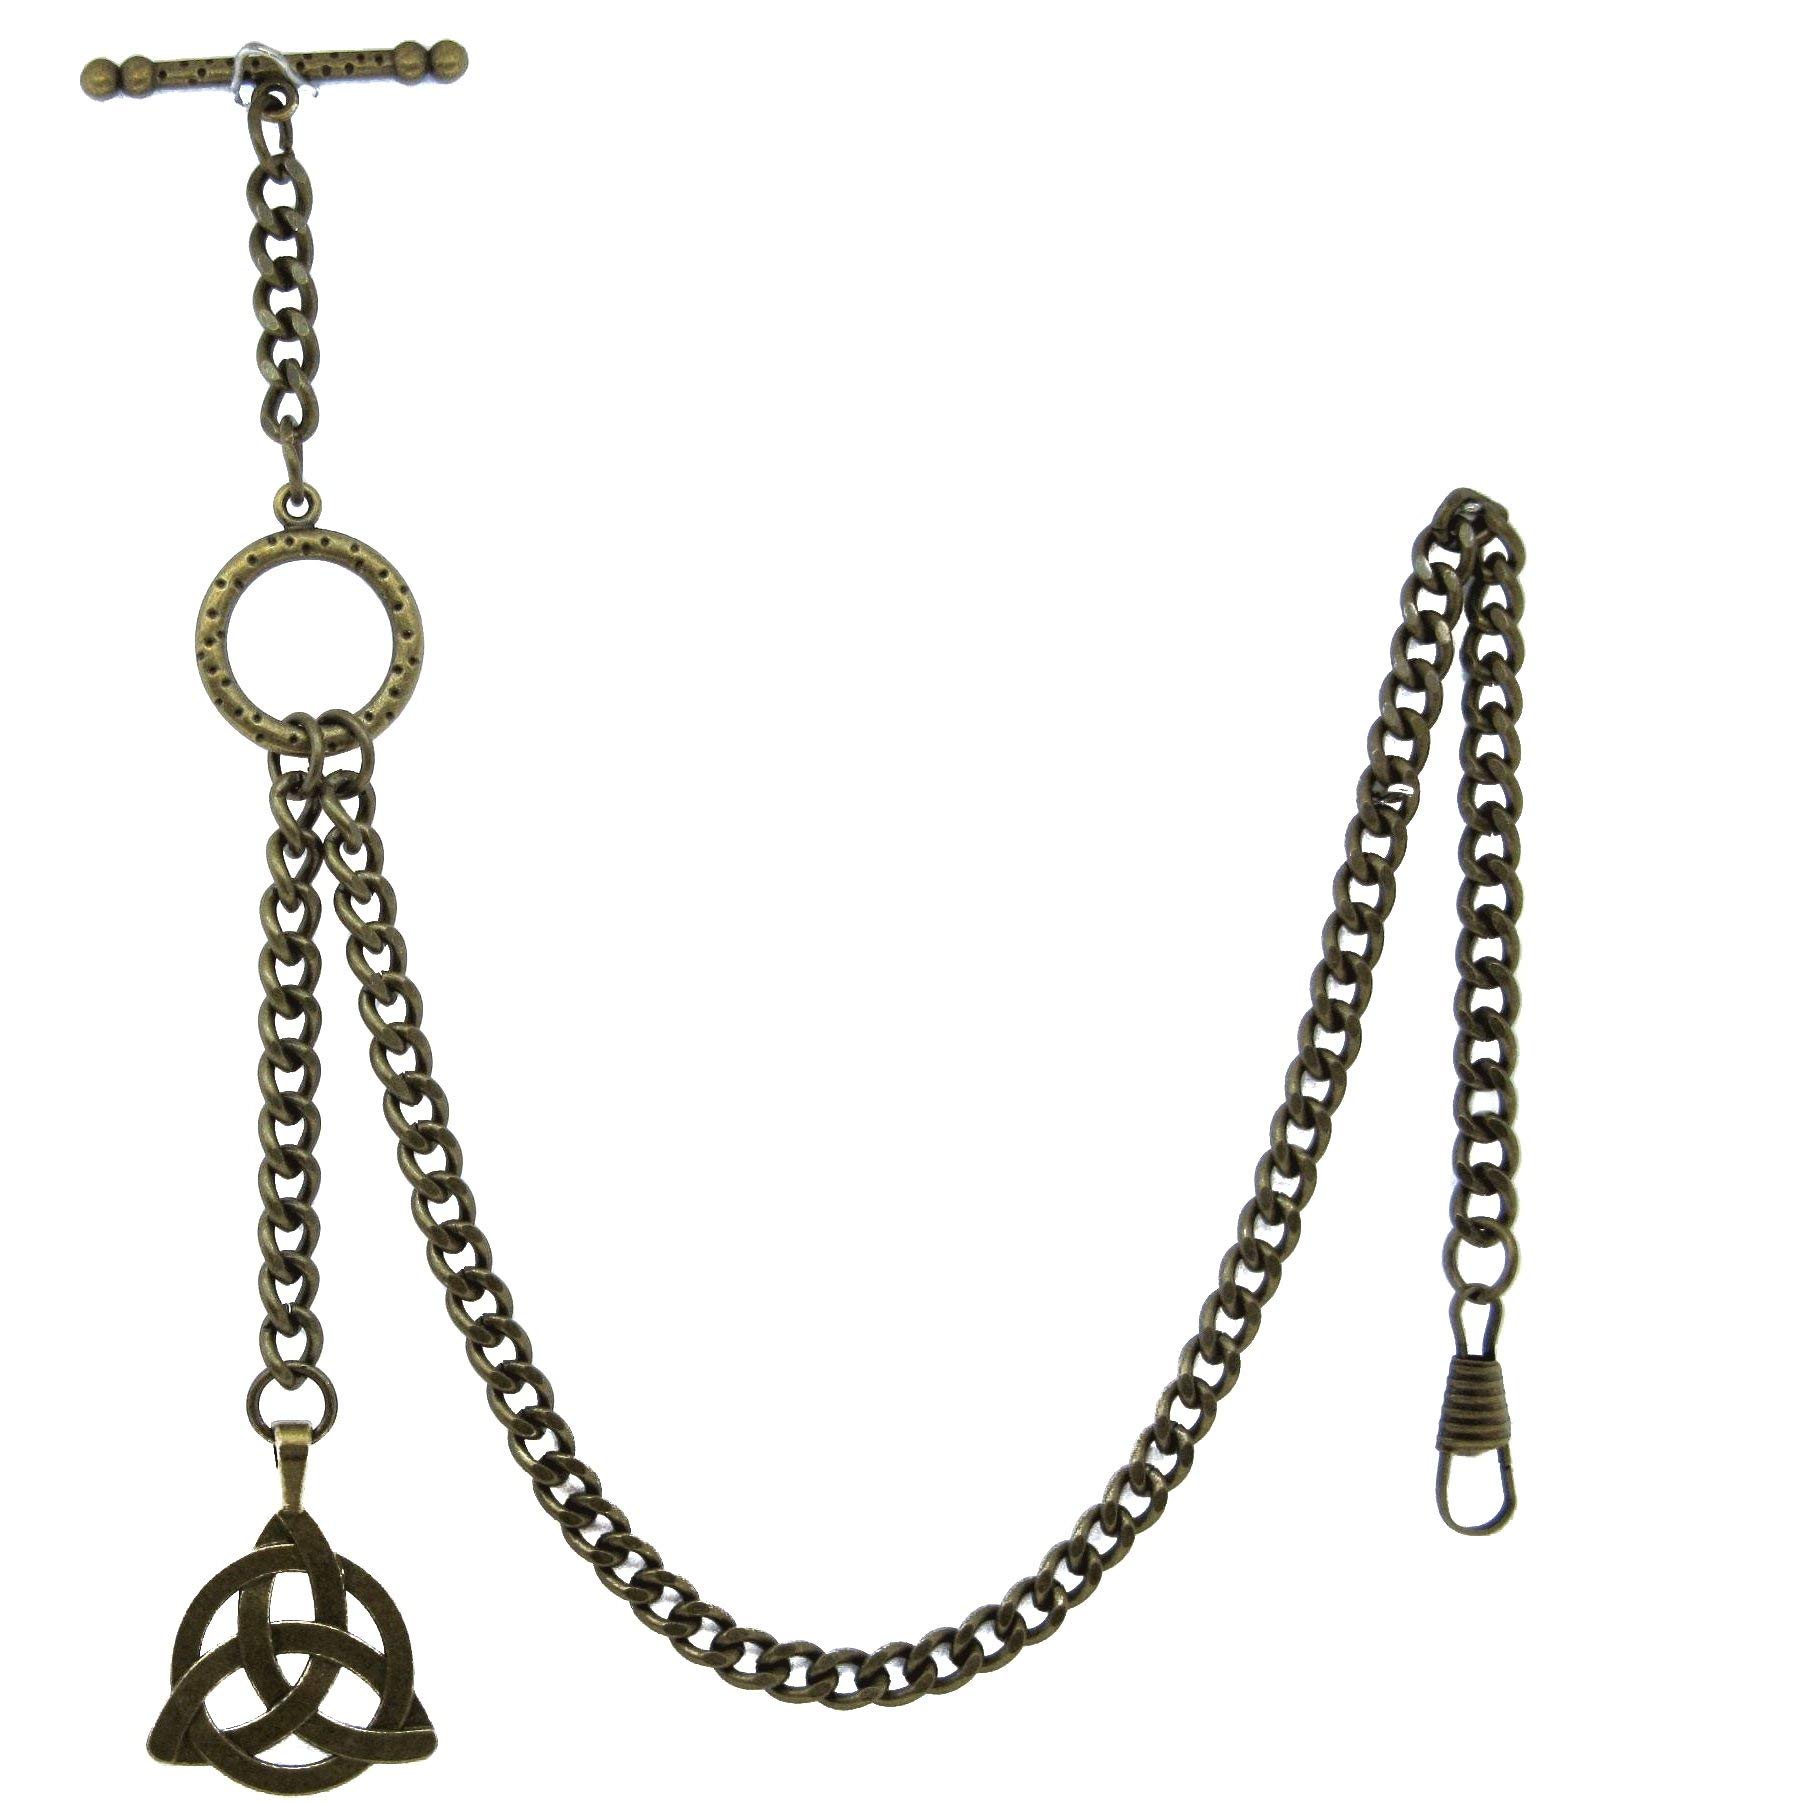 Albert Chain Pocket Watch Chains for Men Antique Brass Color - 2 Ways Usage on Vests & Trousers or Jeans with Symmetrical Pattern Fob T Bar ACT08